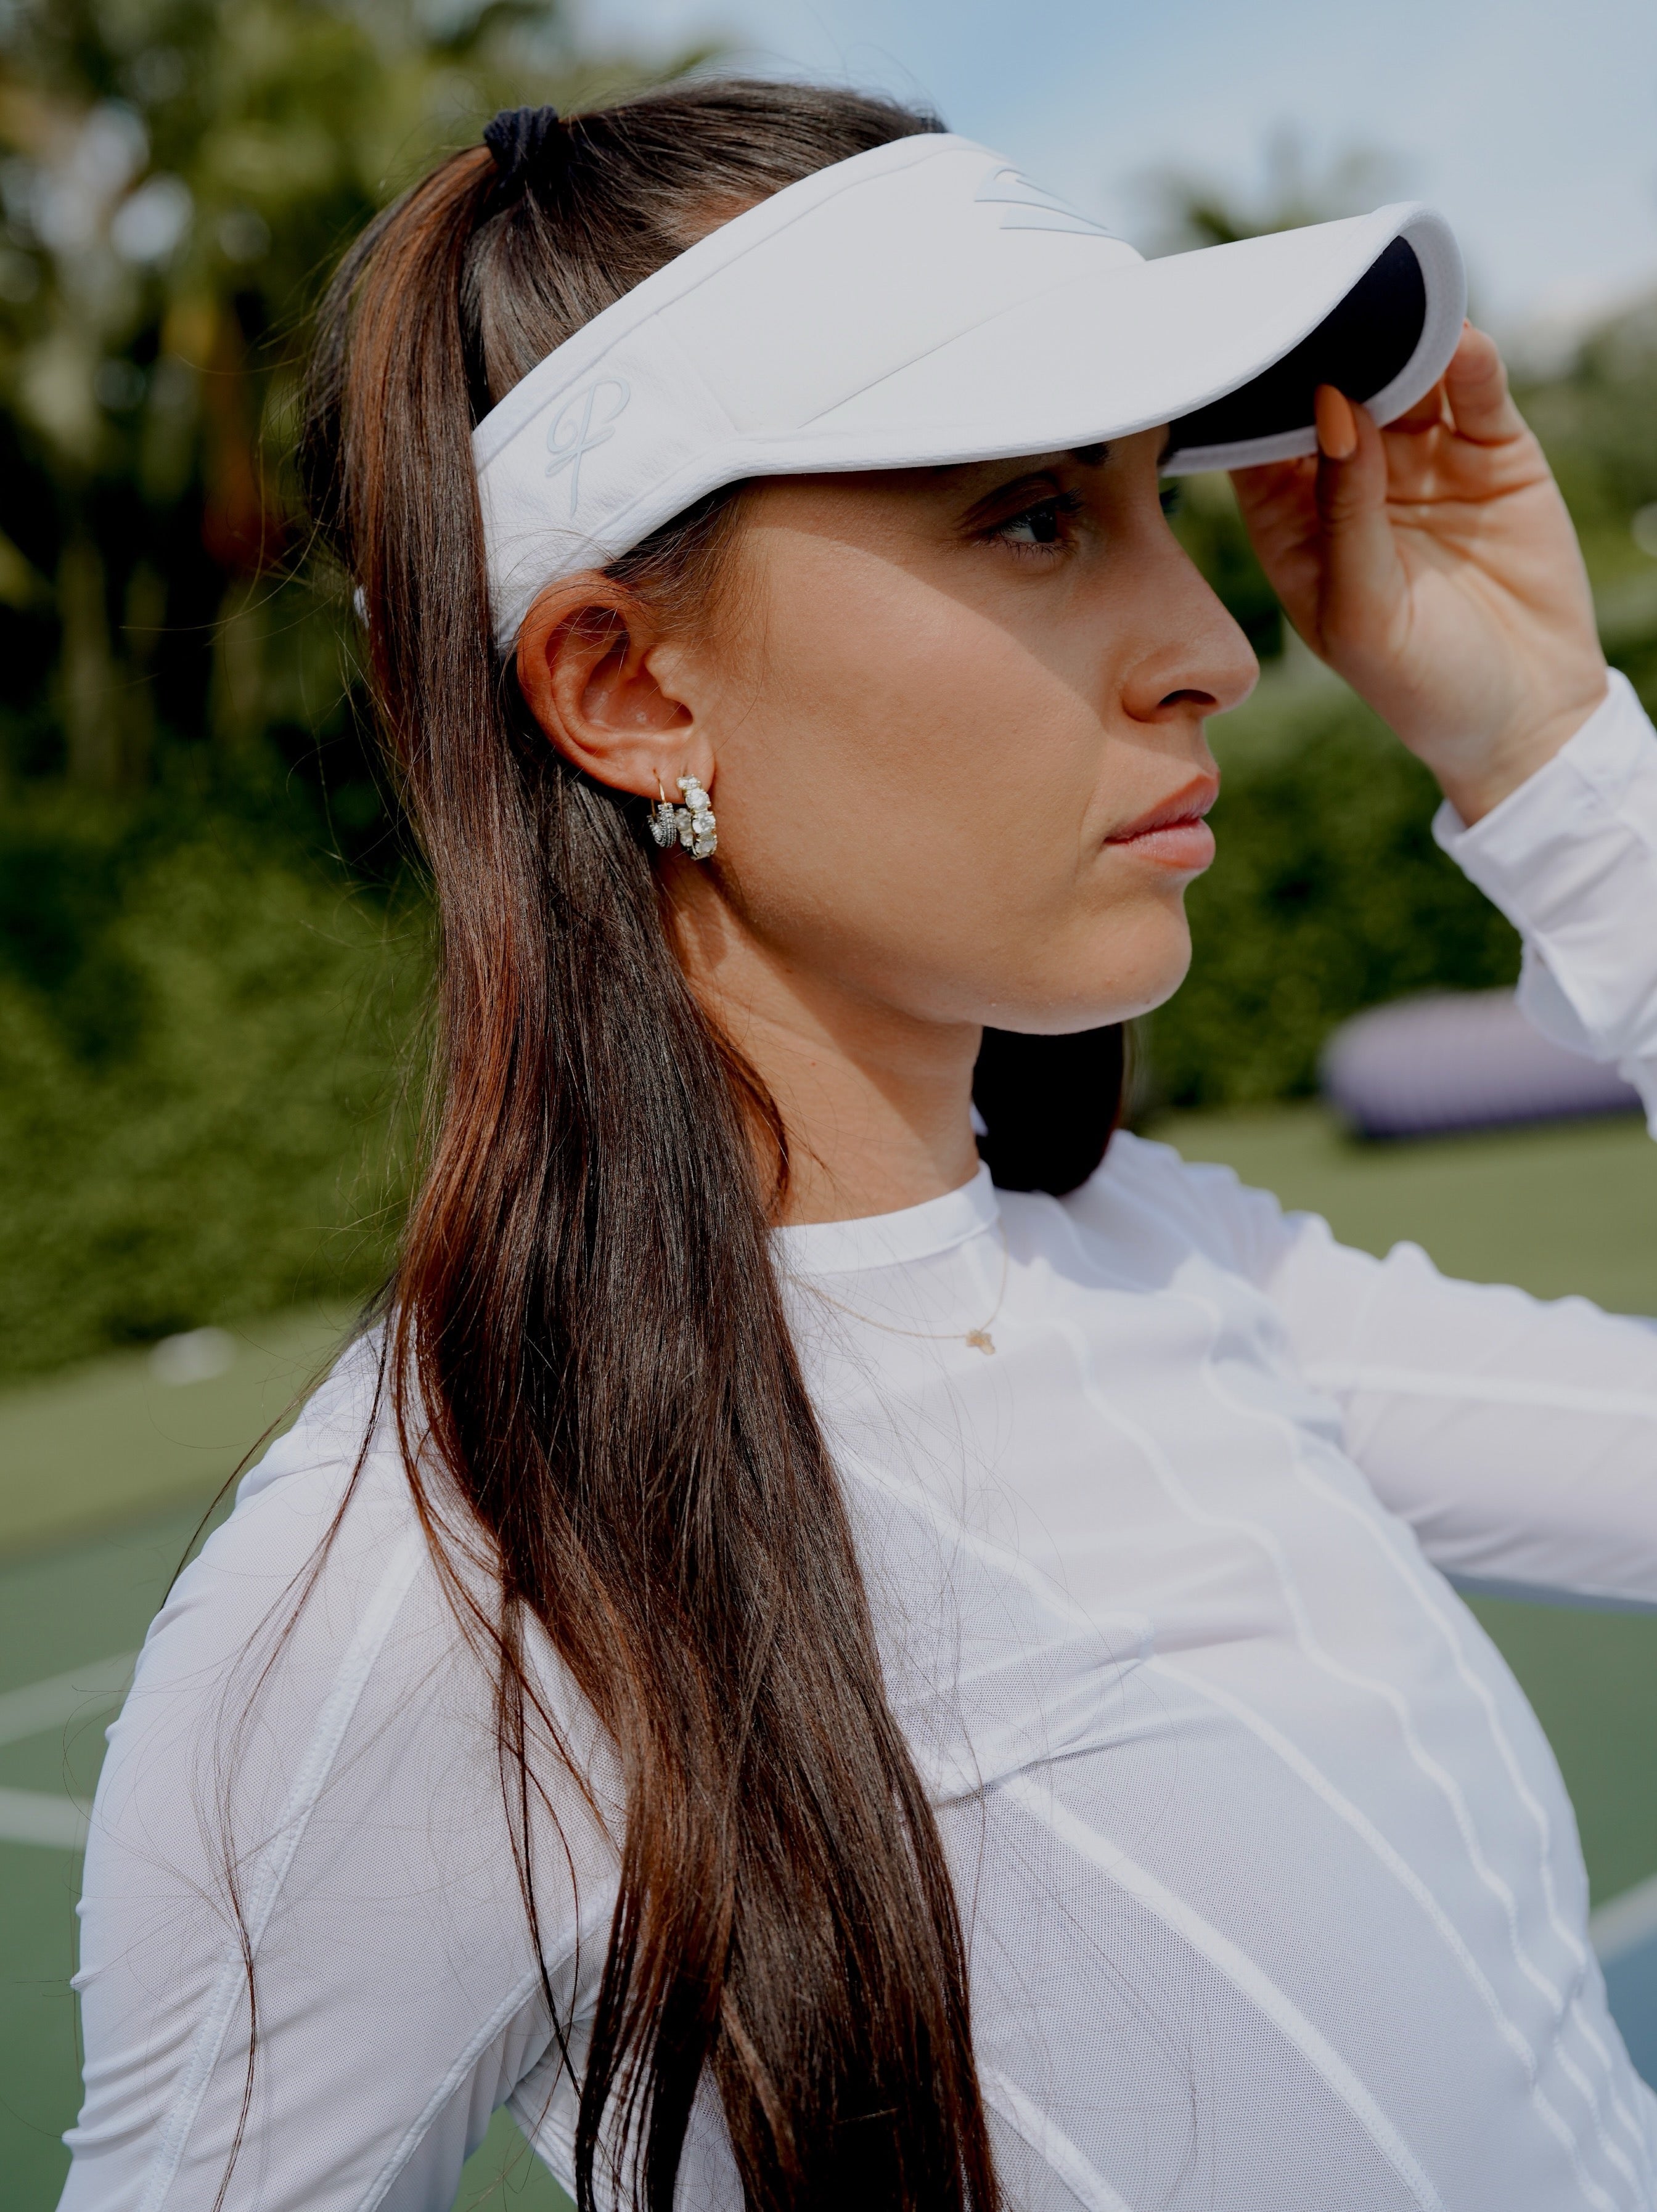 The Parris Todd visor and hat collection accommodates any hairstyle.